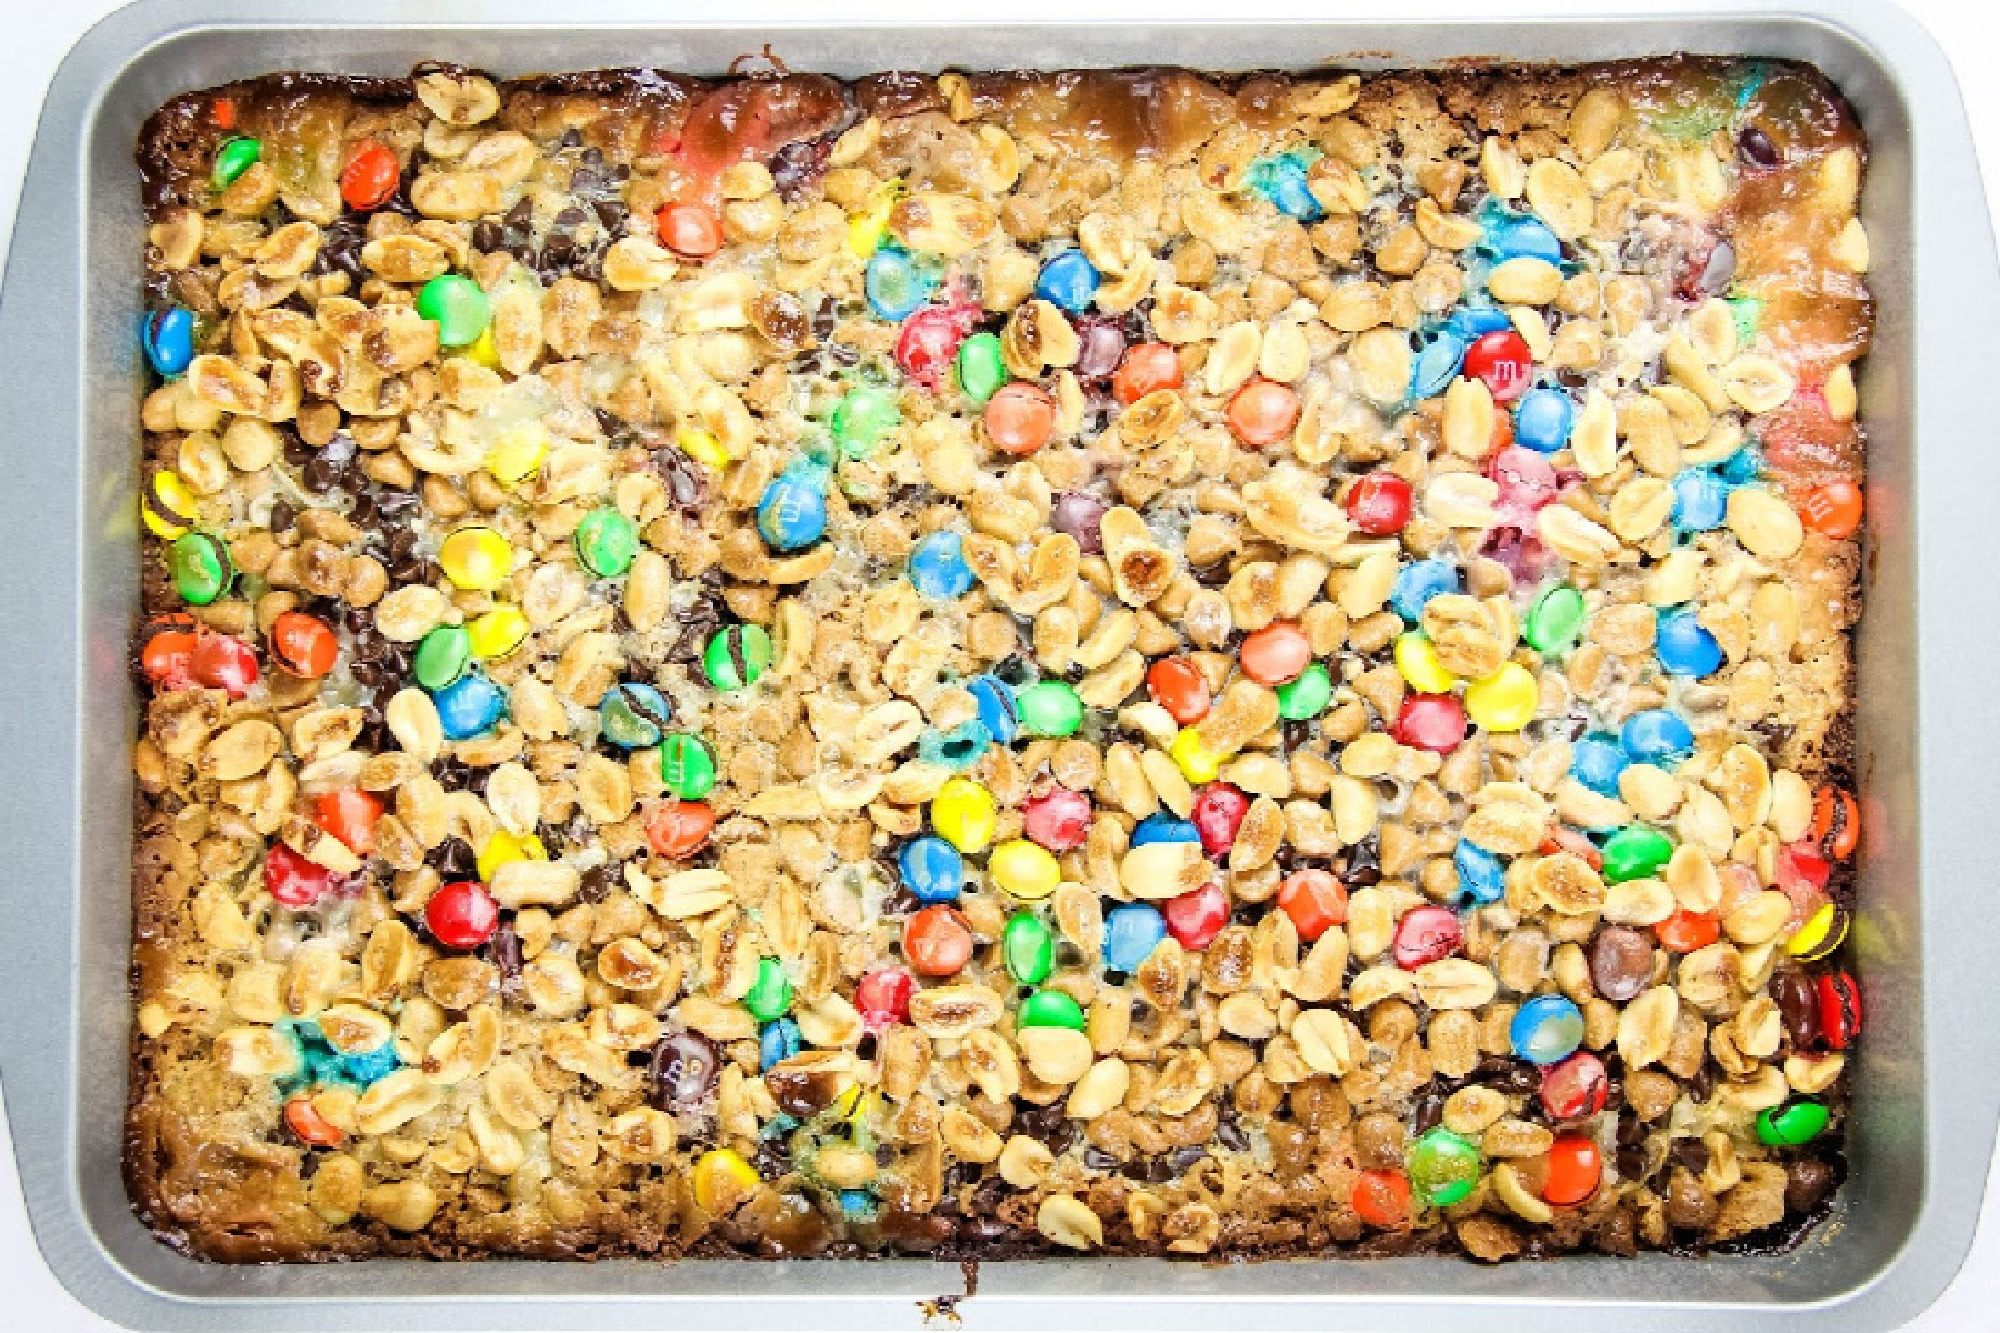 Graham Cracker Cookie Bars topped with m&m's.